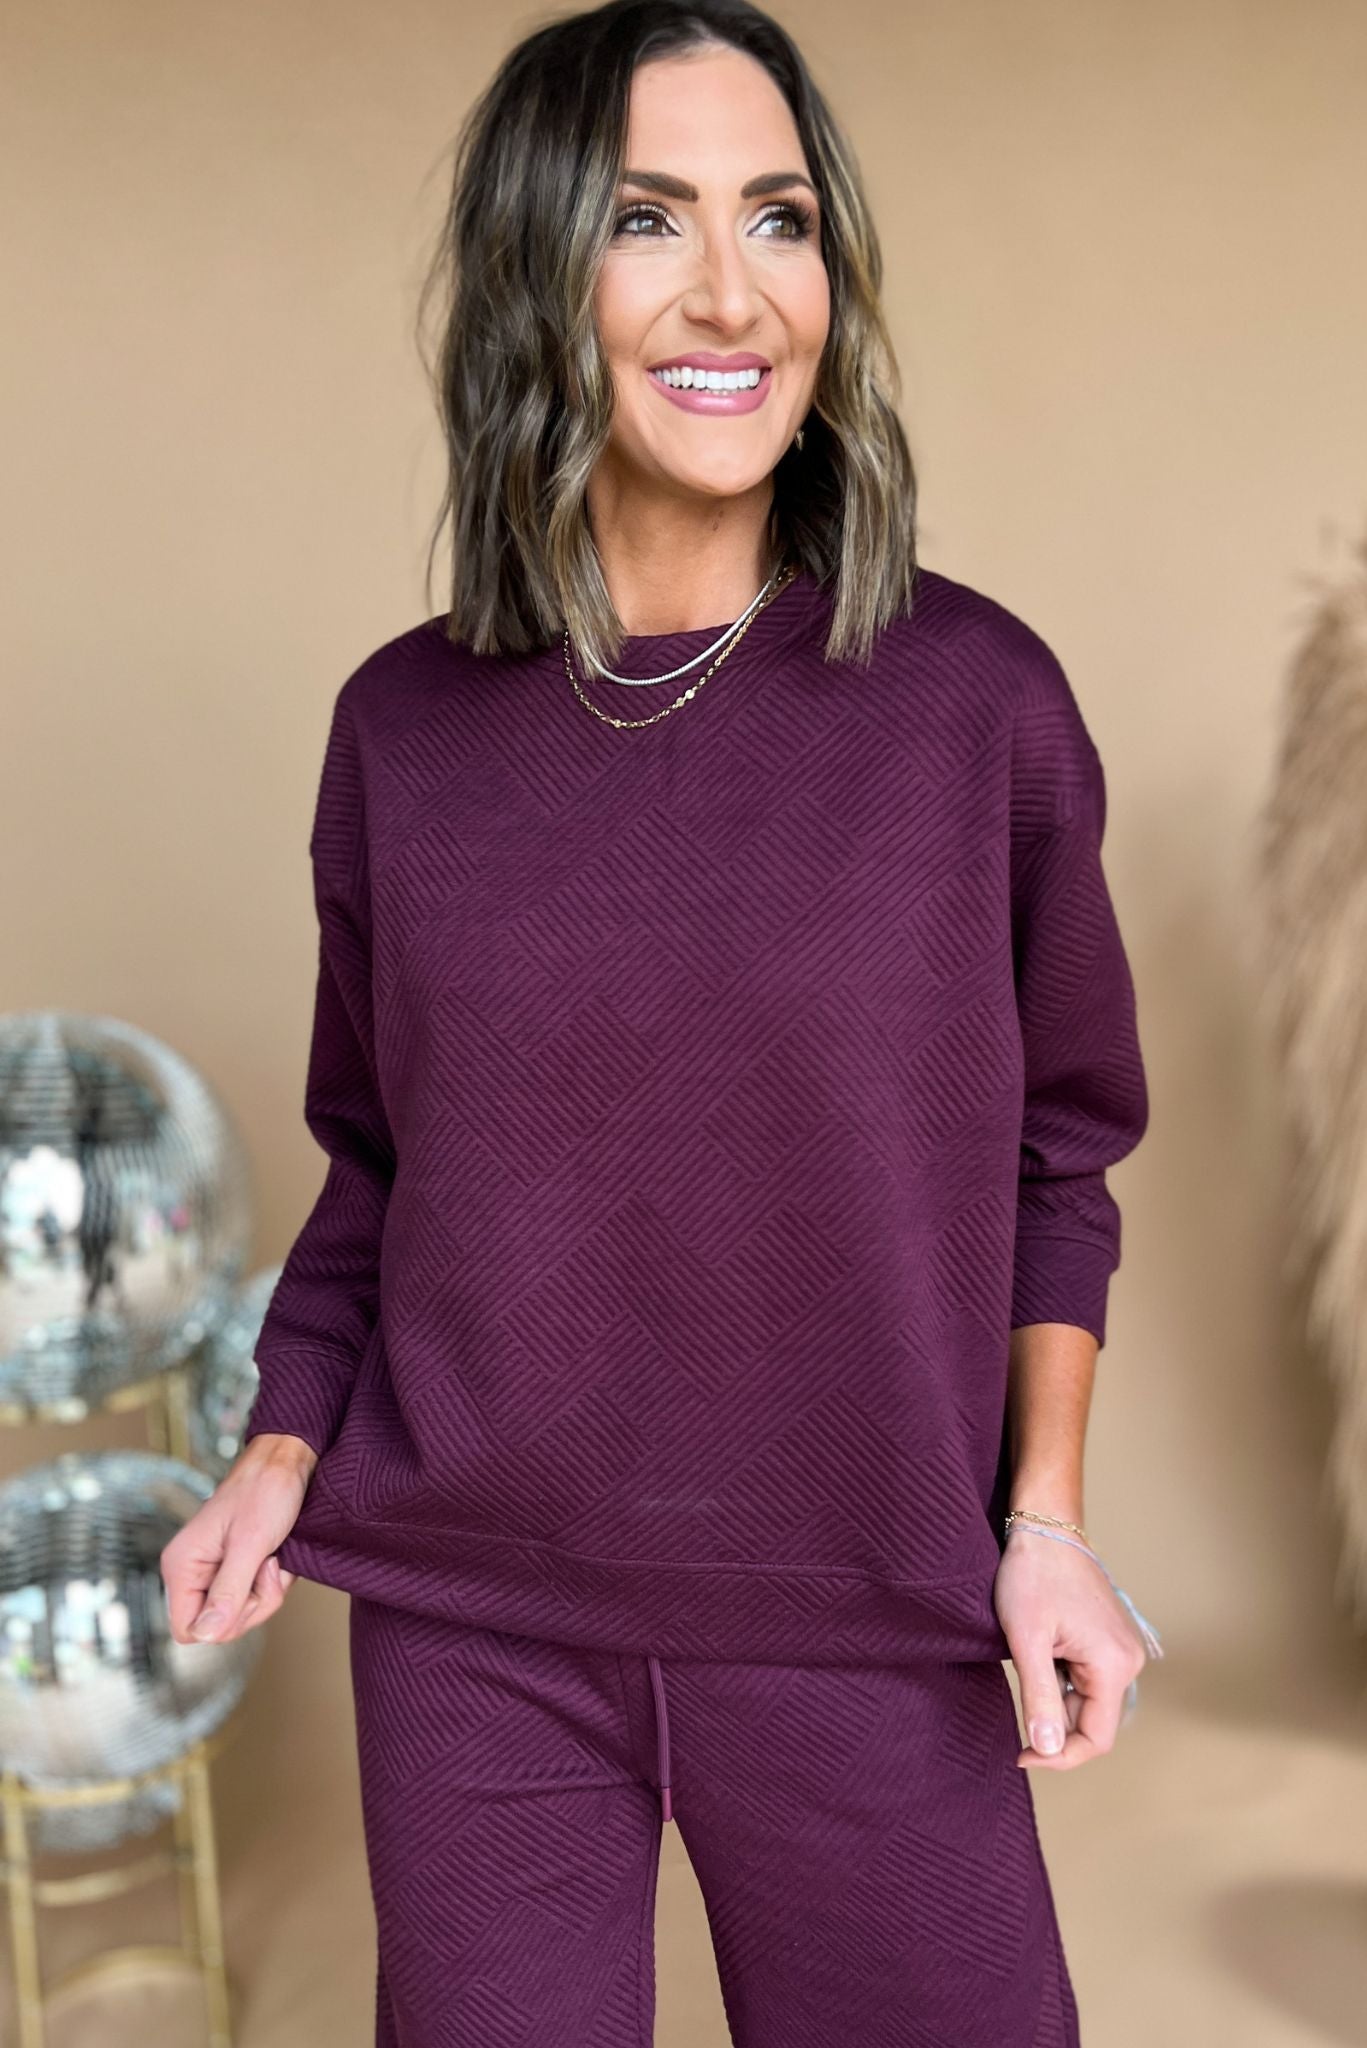 Burgundy Textured Crew Neck Wide Leg Pants Set, matching set, textured print, must have, mom style, travel look, shop style your senses by mallory fitzsimmons